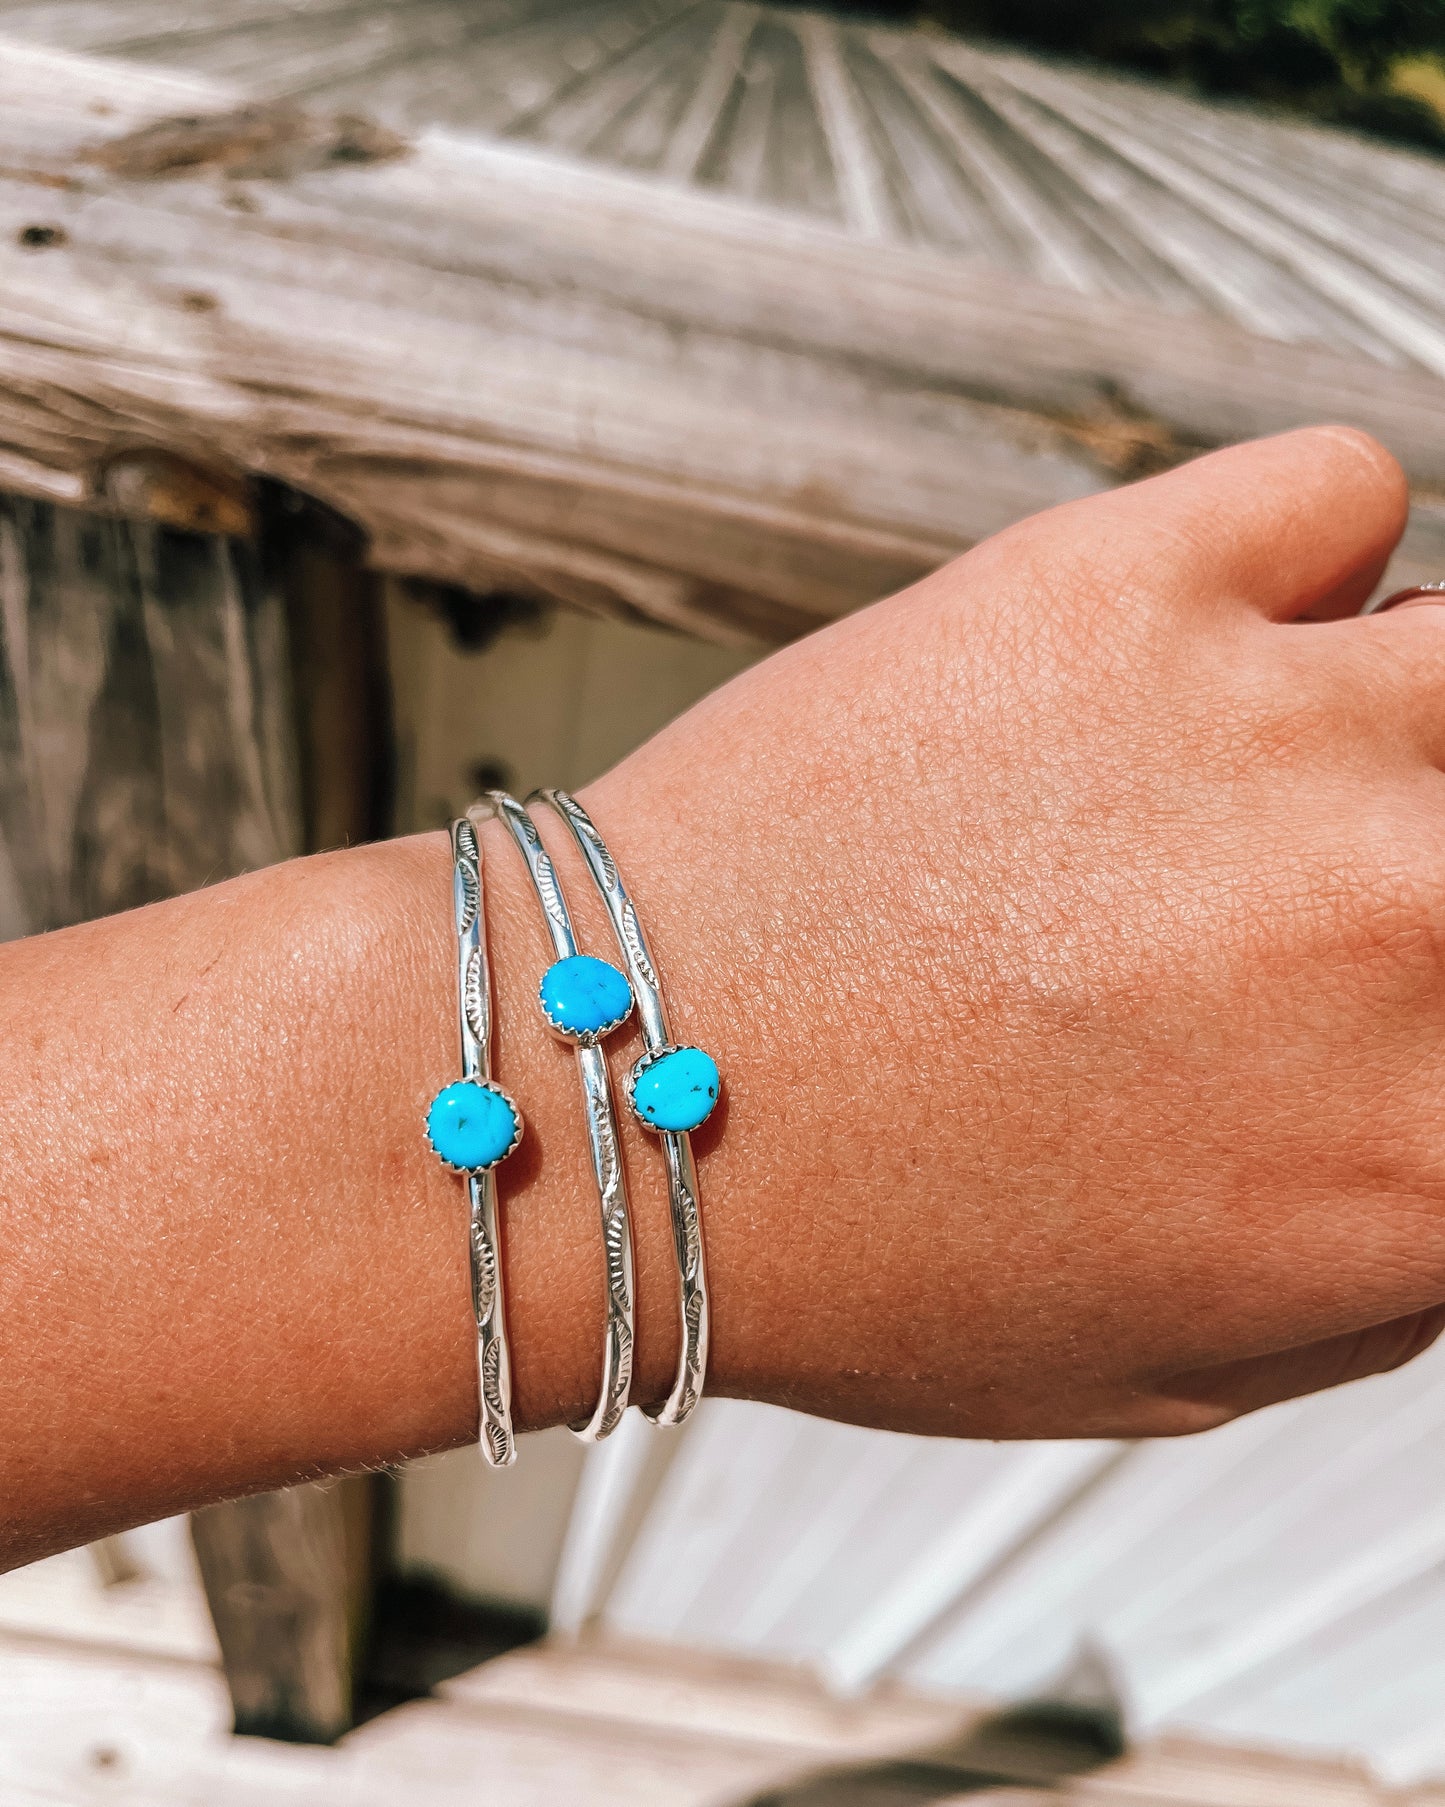 The Authentic Turquoise Bangle